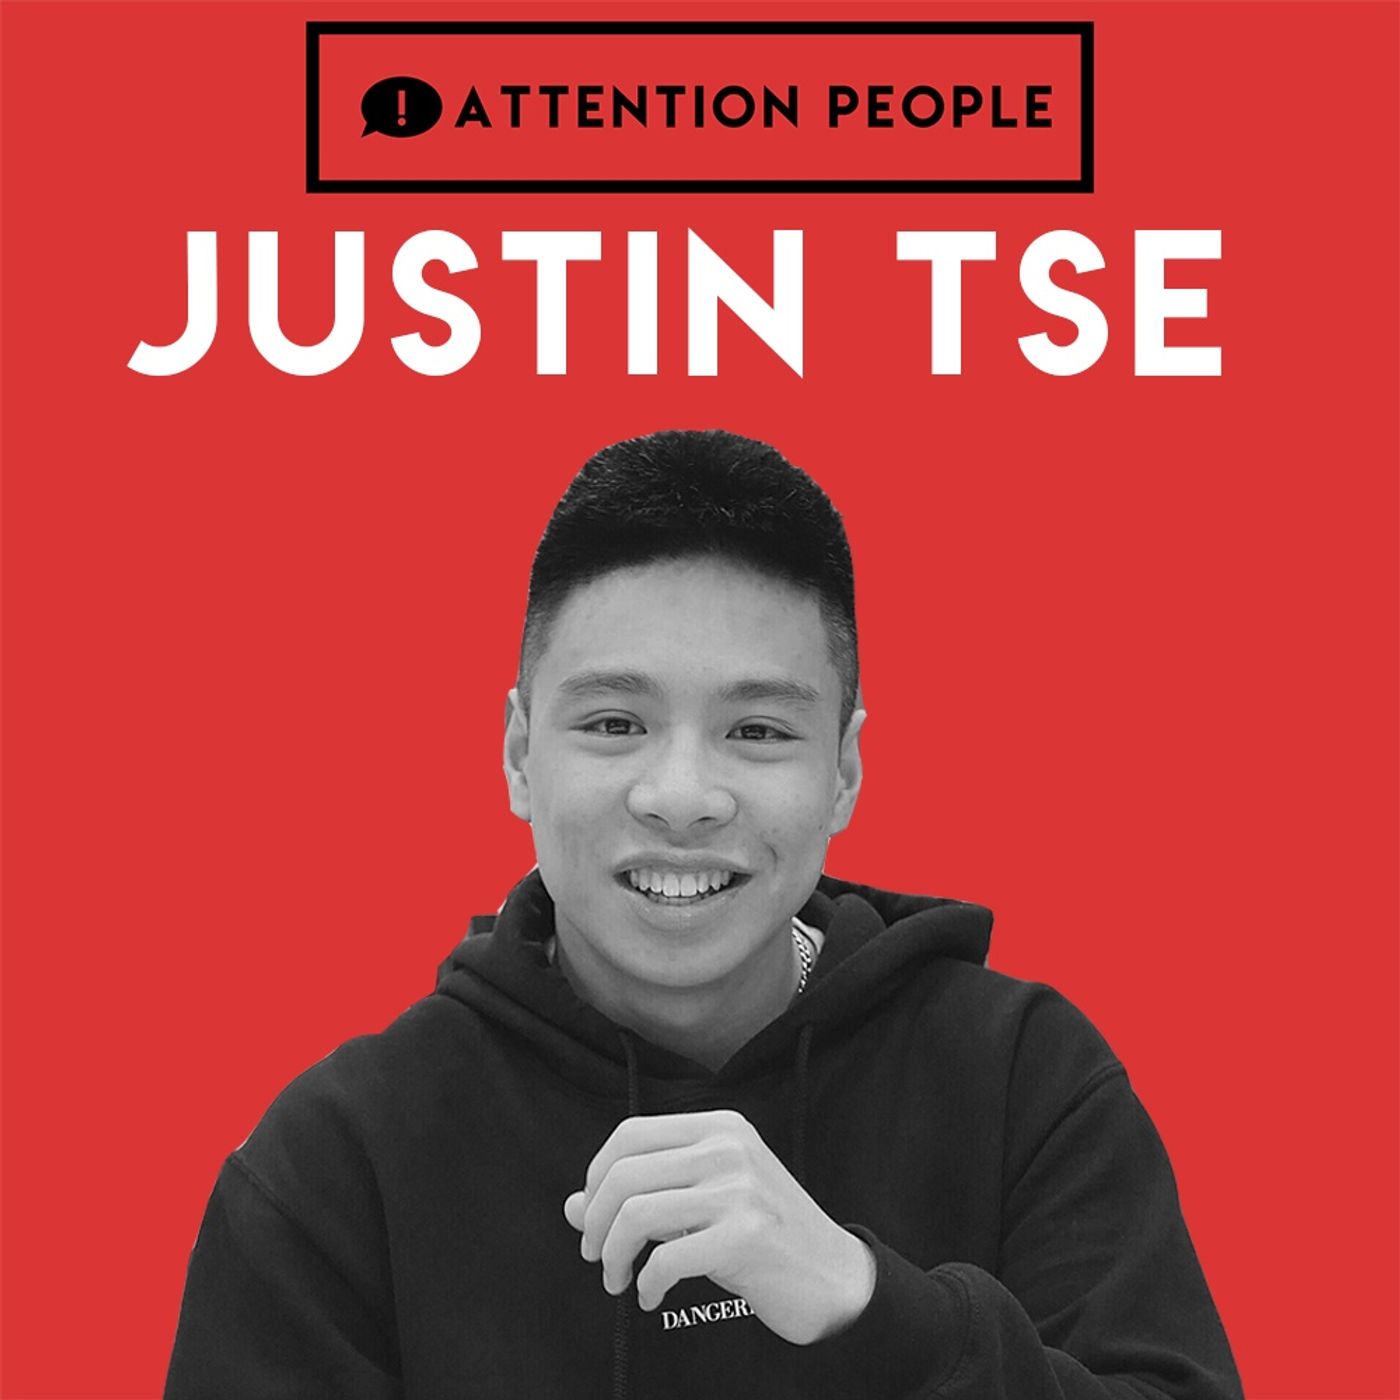 JustinTSE - Inside The Tech Industry & How To Change Your Style